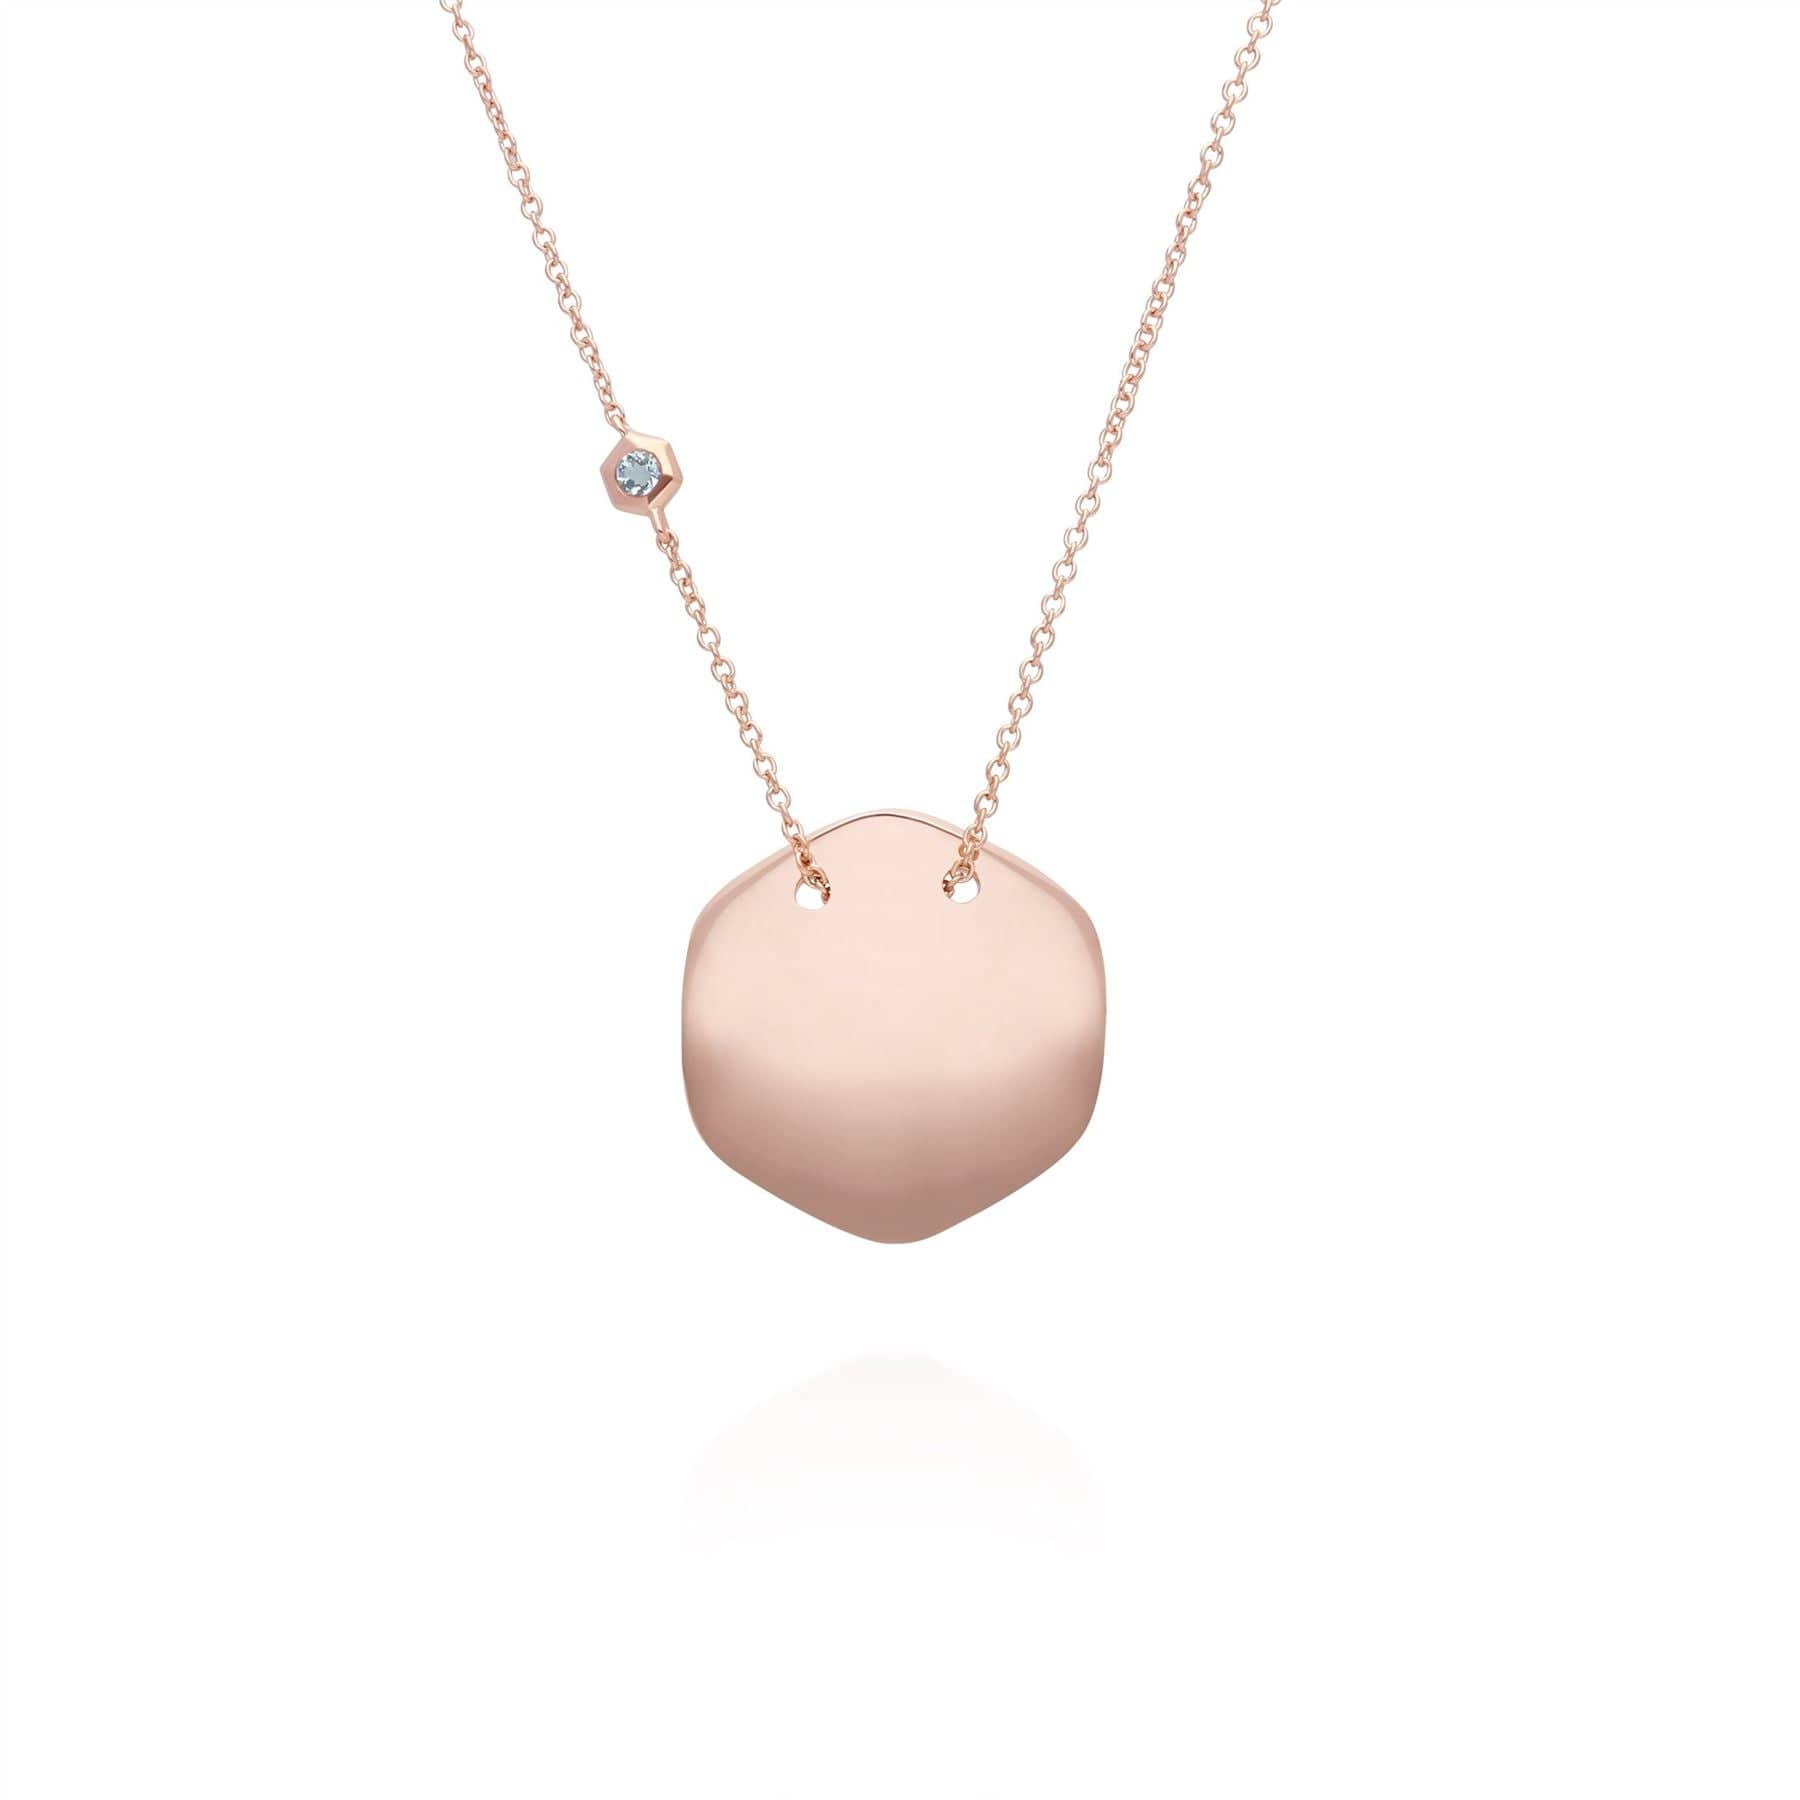 Aquamarine Engravable Necklace in Rose Gold Plated Sterling Silver - Gemondo